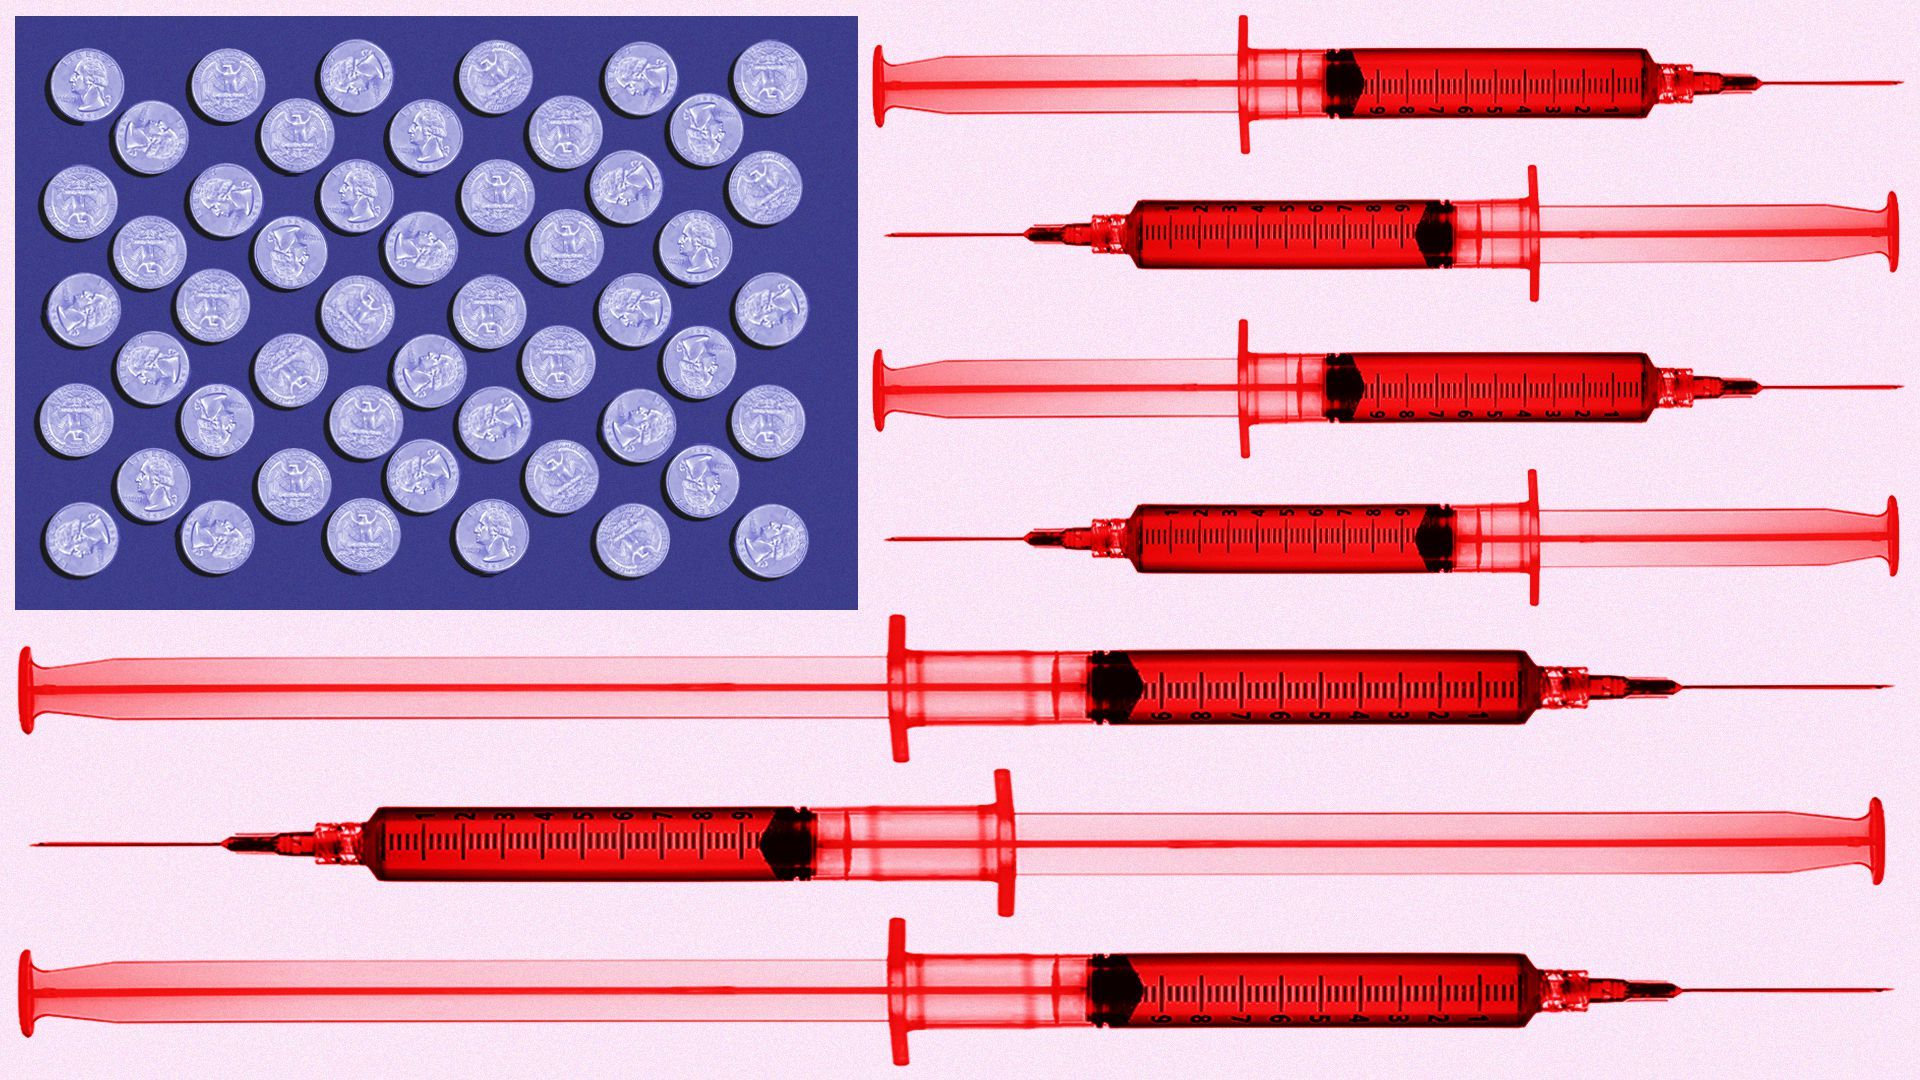 Illustration of the U.S. map made up of vaccination syringes and quarters